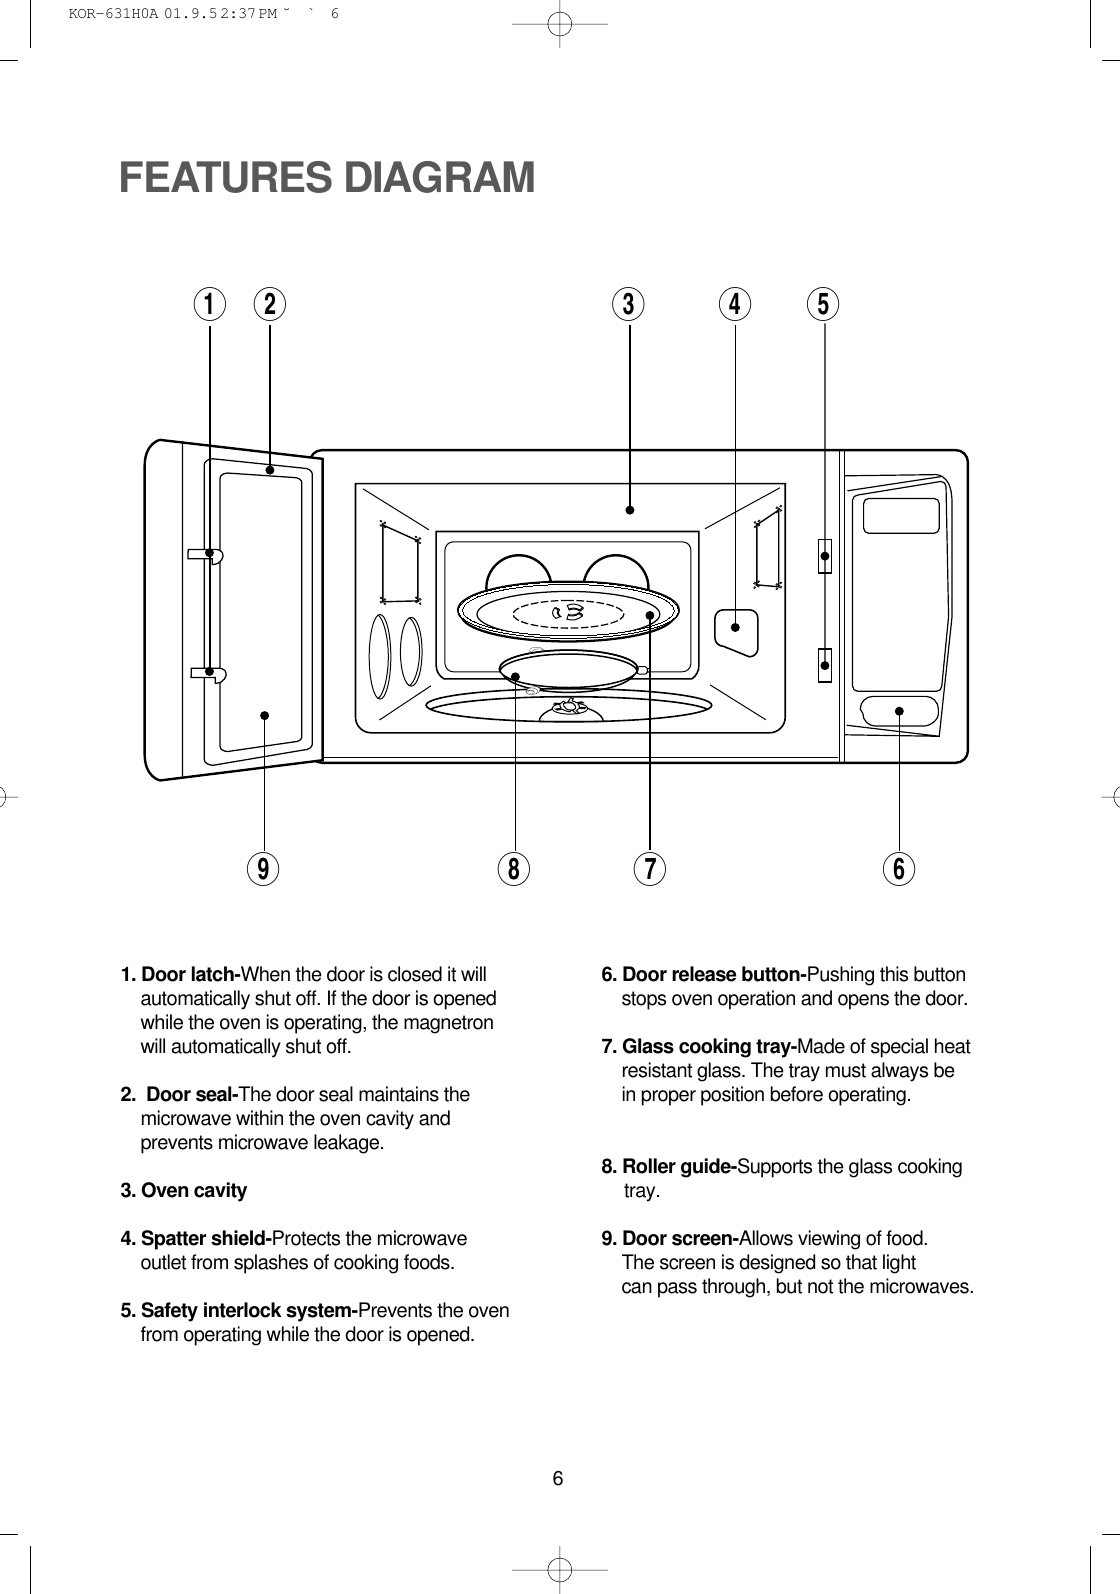 61. Door latch-When the door is closed it will automatically shut off. If the door is openedwhile the oven is operating, the magnetronwill automatically shut off.2.  Door seal-The door seal maintains the microwave within the oven cavity and prevents microwave leakage.3. Oven cavity4. Spatter shield-Protects the microwave outlet from splashes of cooking foods.5. Safety interlock system-Prevents the ovenfrom operating while the door is opened.6. Door release button-Pushing this buttonstops oven operation and opens the door.7. Glass cooking tray-Made of special heat resistant glass. The tray must always bein proper position before operating. 8. Roller guide-Supports the glass cookingtray.9. Door screen-Allows viewing of food. The screen is designed so that light can pass through, but not the microwaves. FEATURES DIAGRAM543219876 KOR-631H0A  01.9.5 2:37 PM  ˘`6